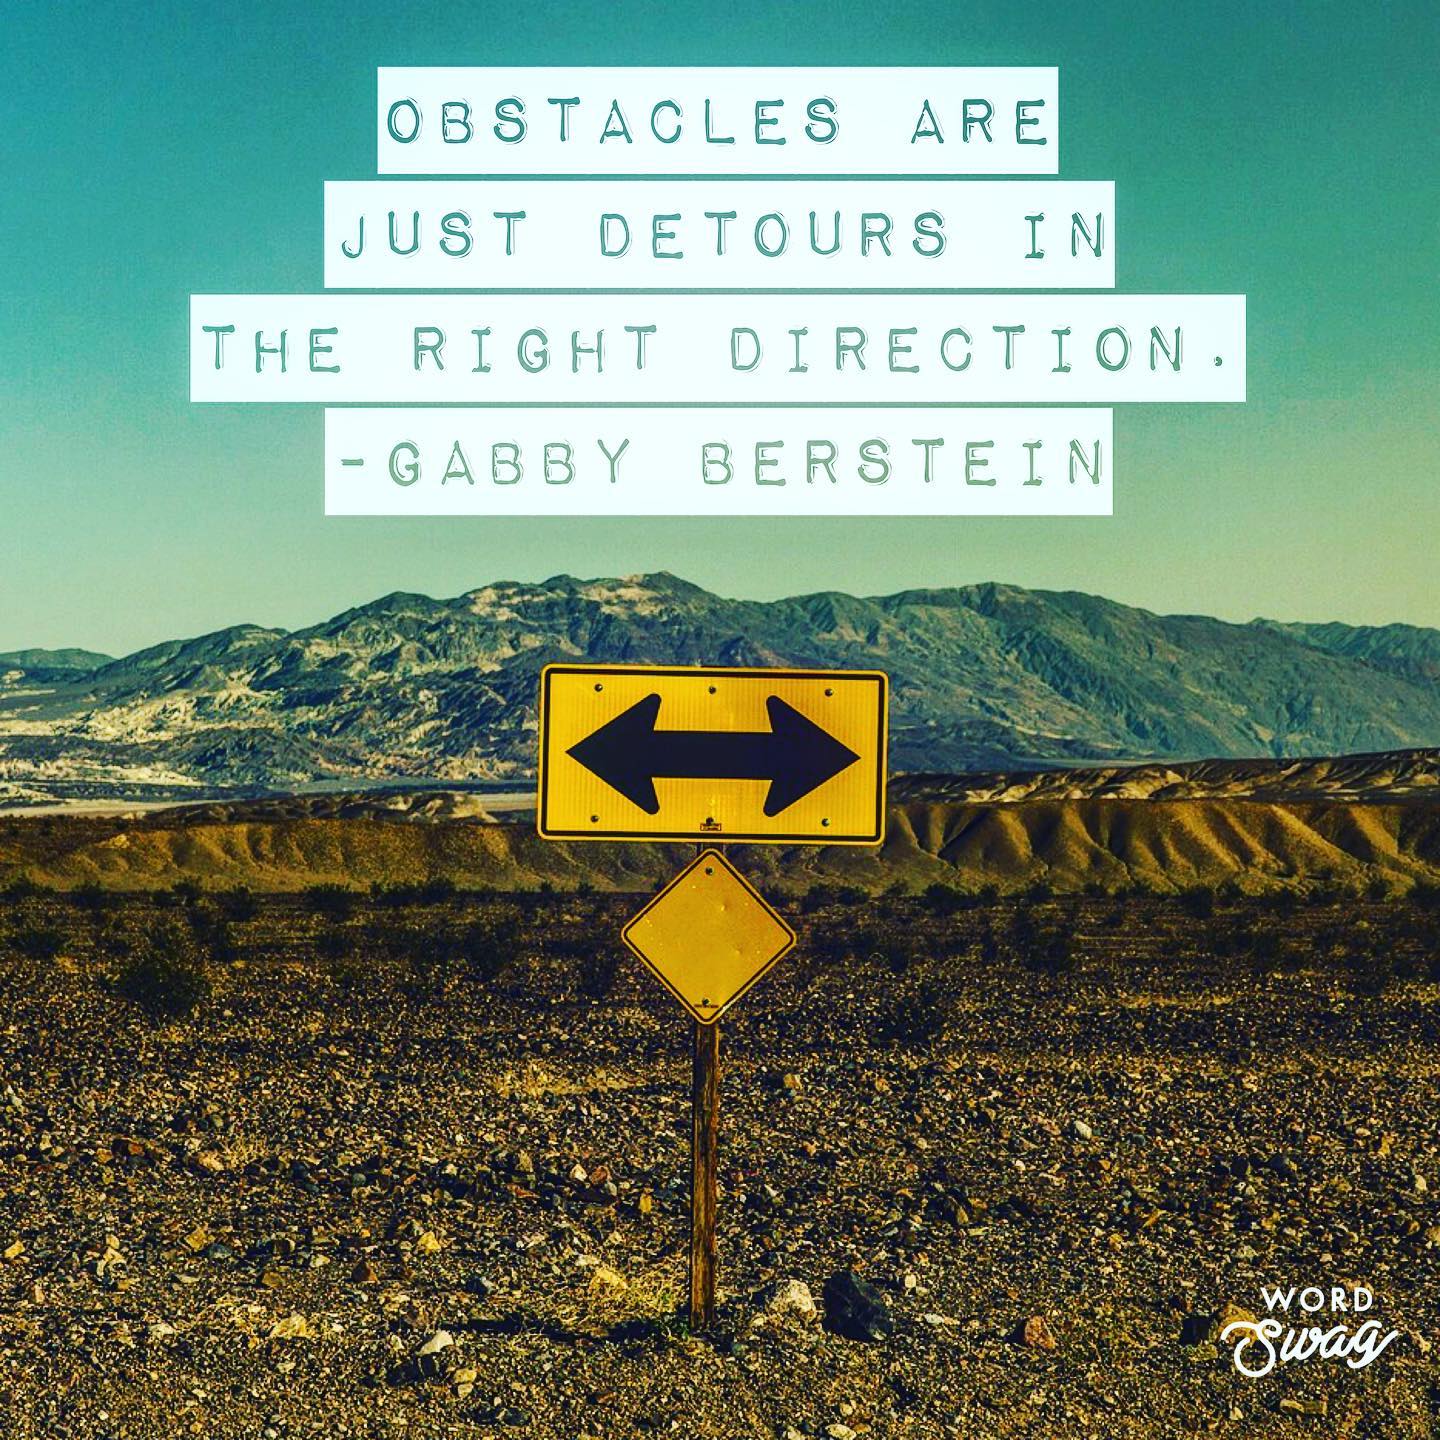 directionless.
•••
#wordsofwisdom #words #quotestoliveby #quotes #wordswag #obstacles #gabbybernstein @gabbybernstein #wedwisdom #wednesdaywisdom✨